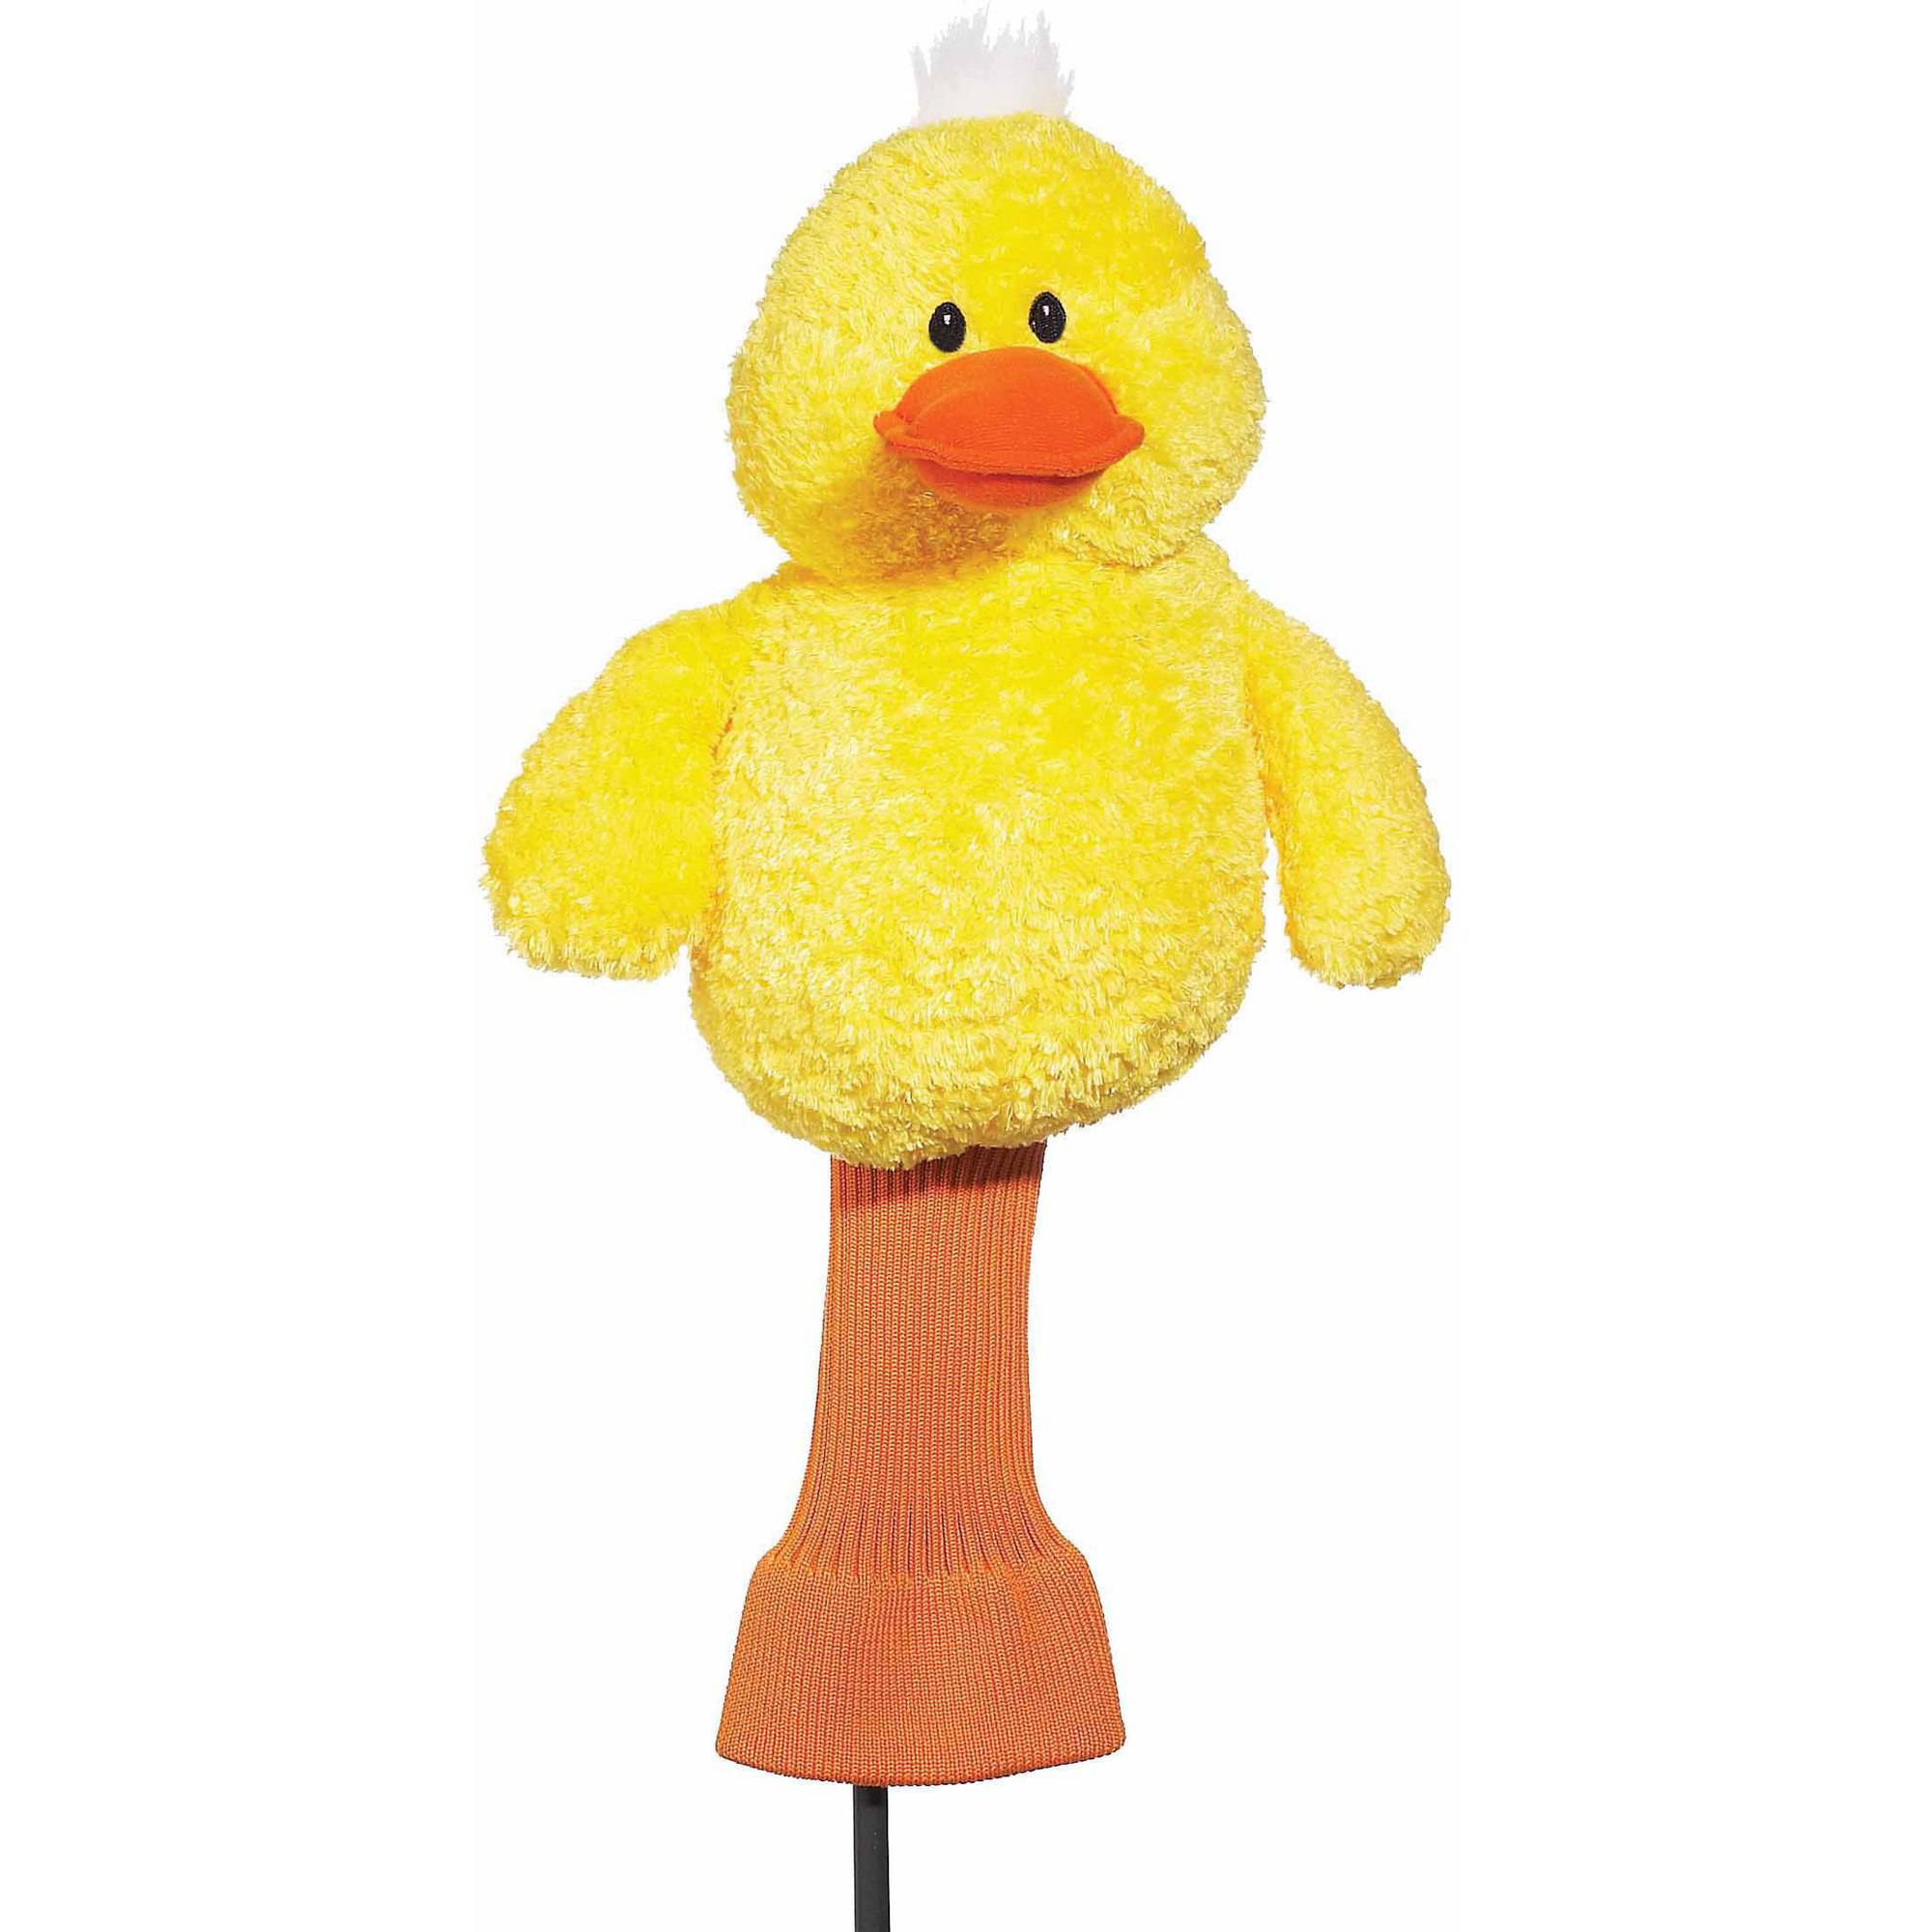 Creative Covers For Golf Cuddle Pals “Duck!!” The Cover Driver Headcover -$7 (67% Off)